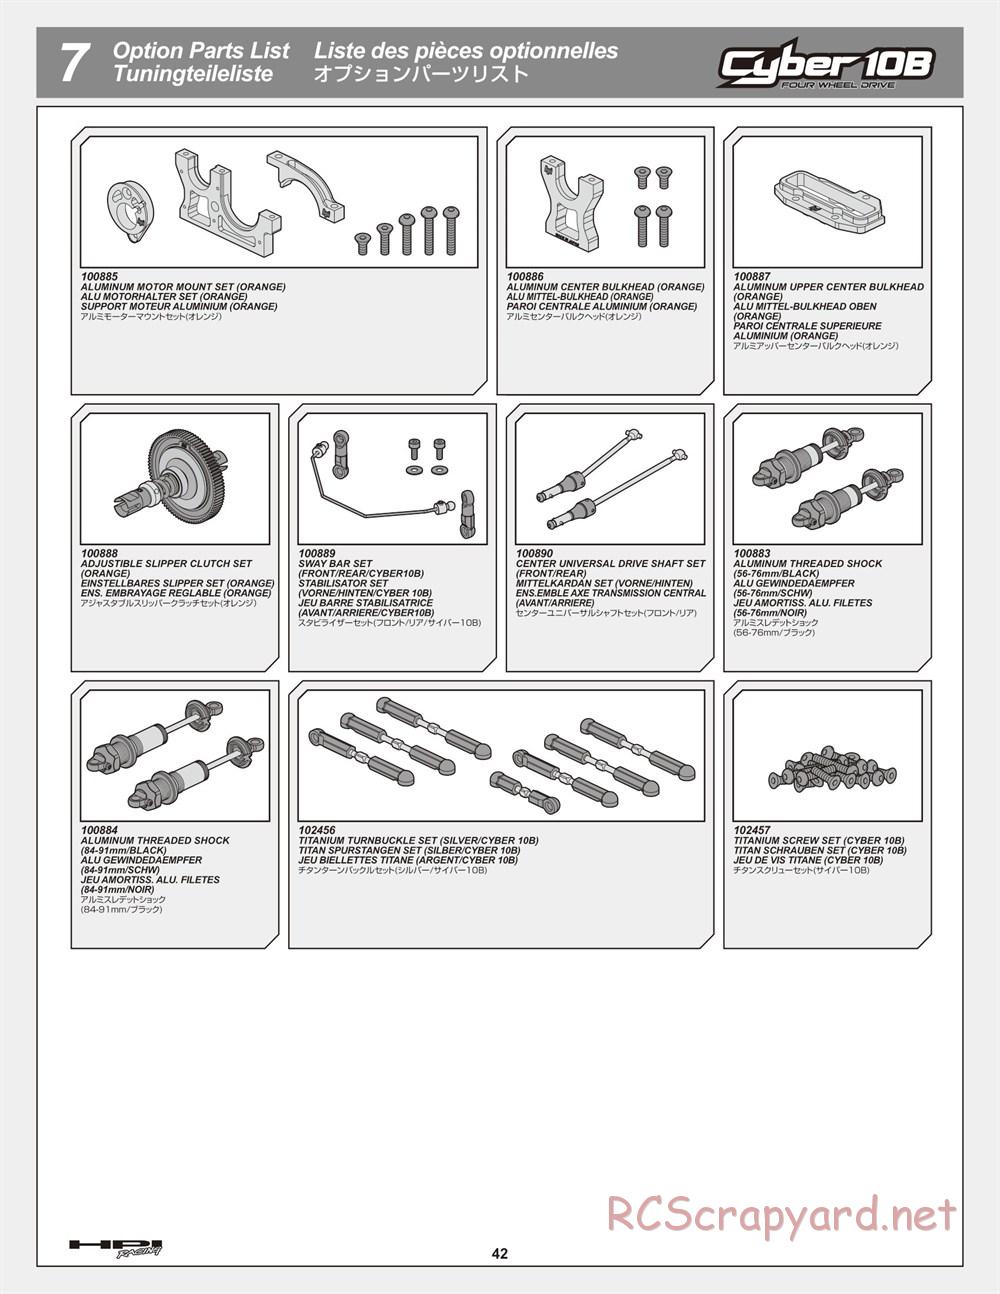 HPI - Cyber 10B - Exploded View - Page 42